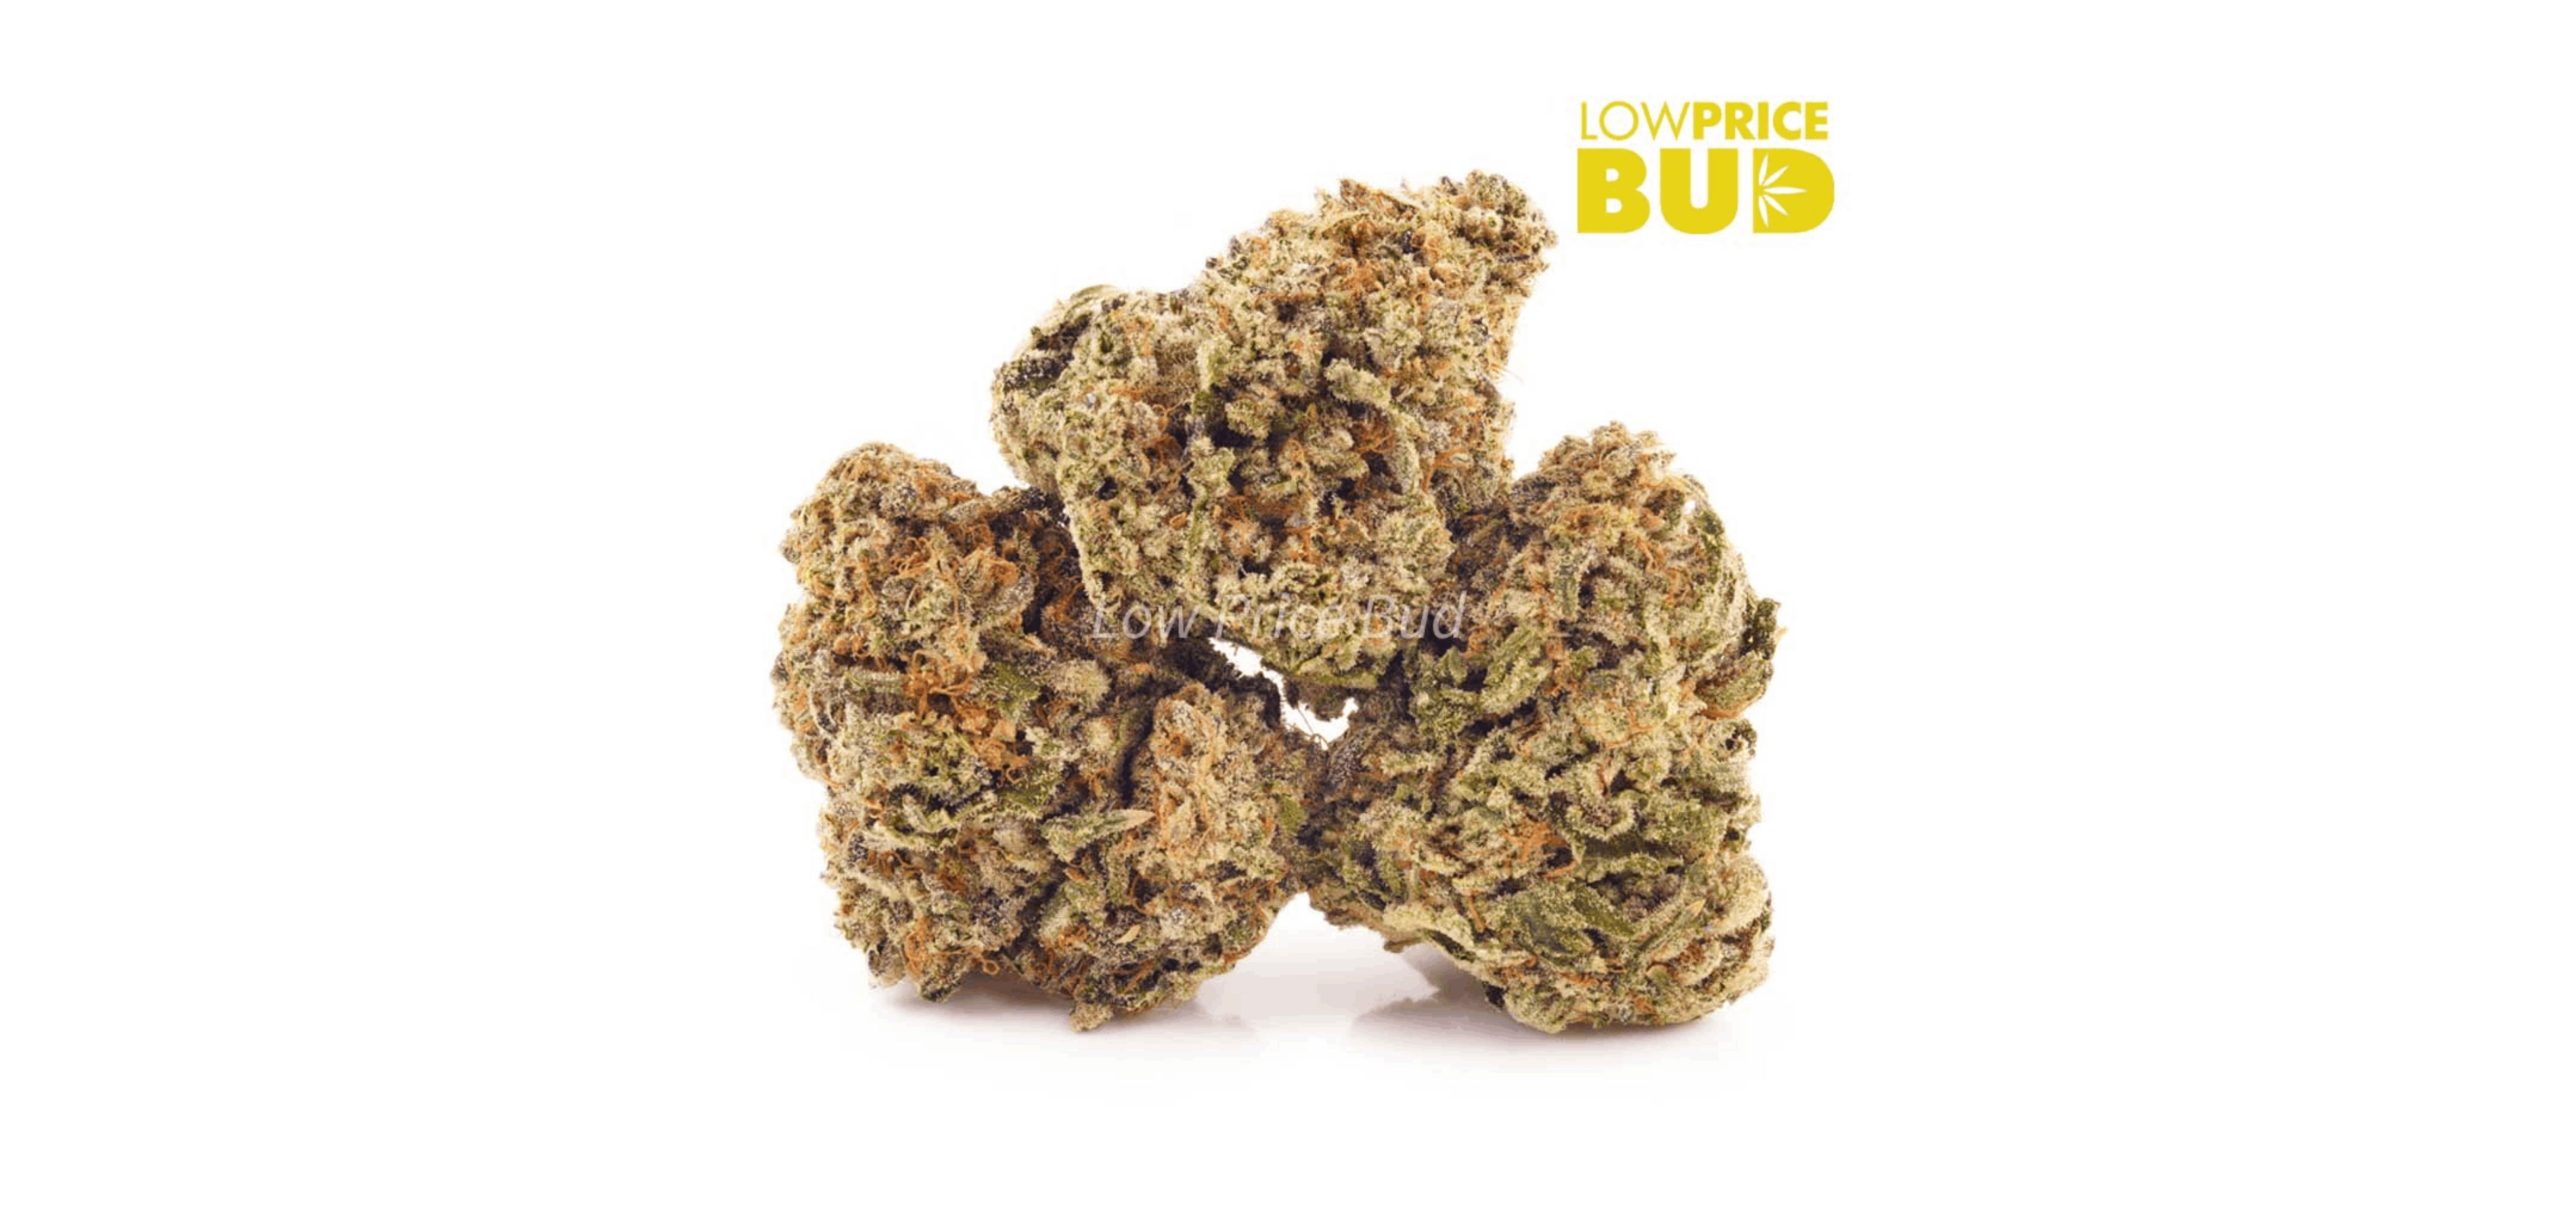 The Sundae Driver (AAA) is another great alternative to the Fruity Pebbles strain, and for good reason - it's the child of Fruity Pebbles!